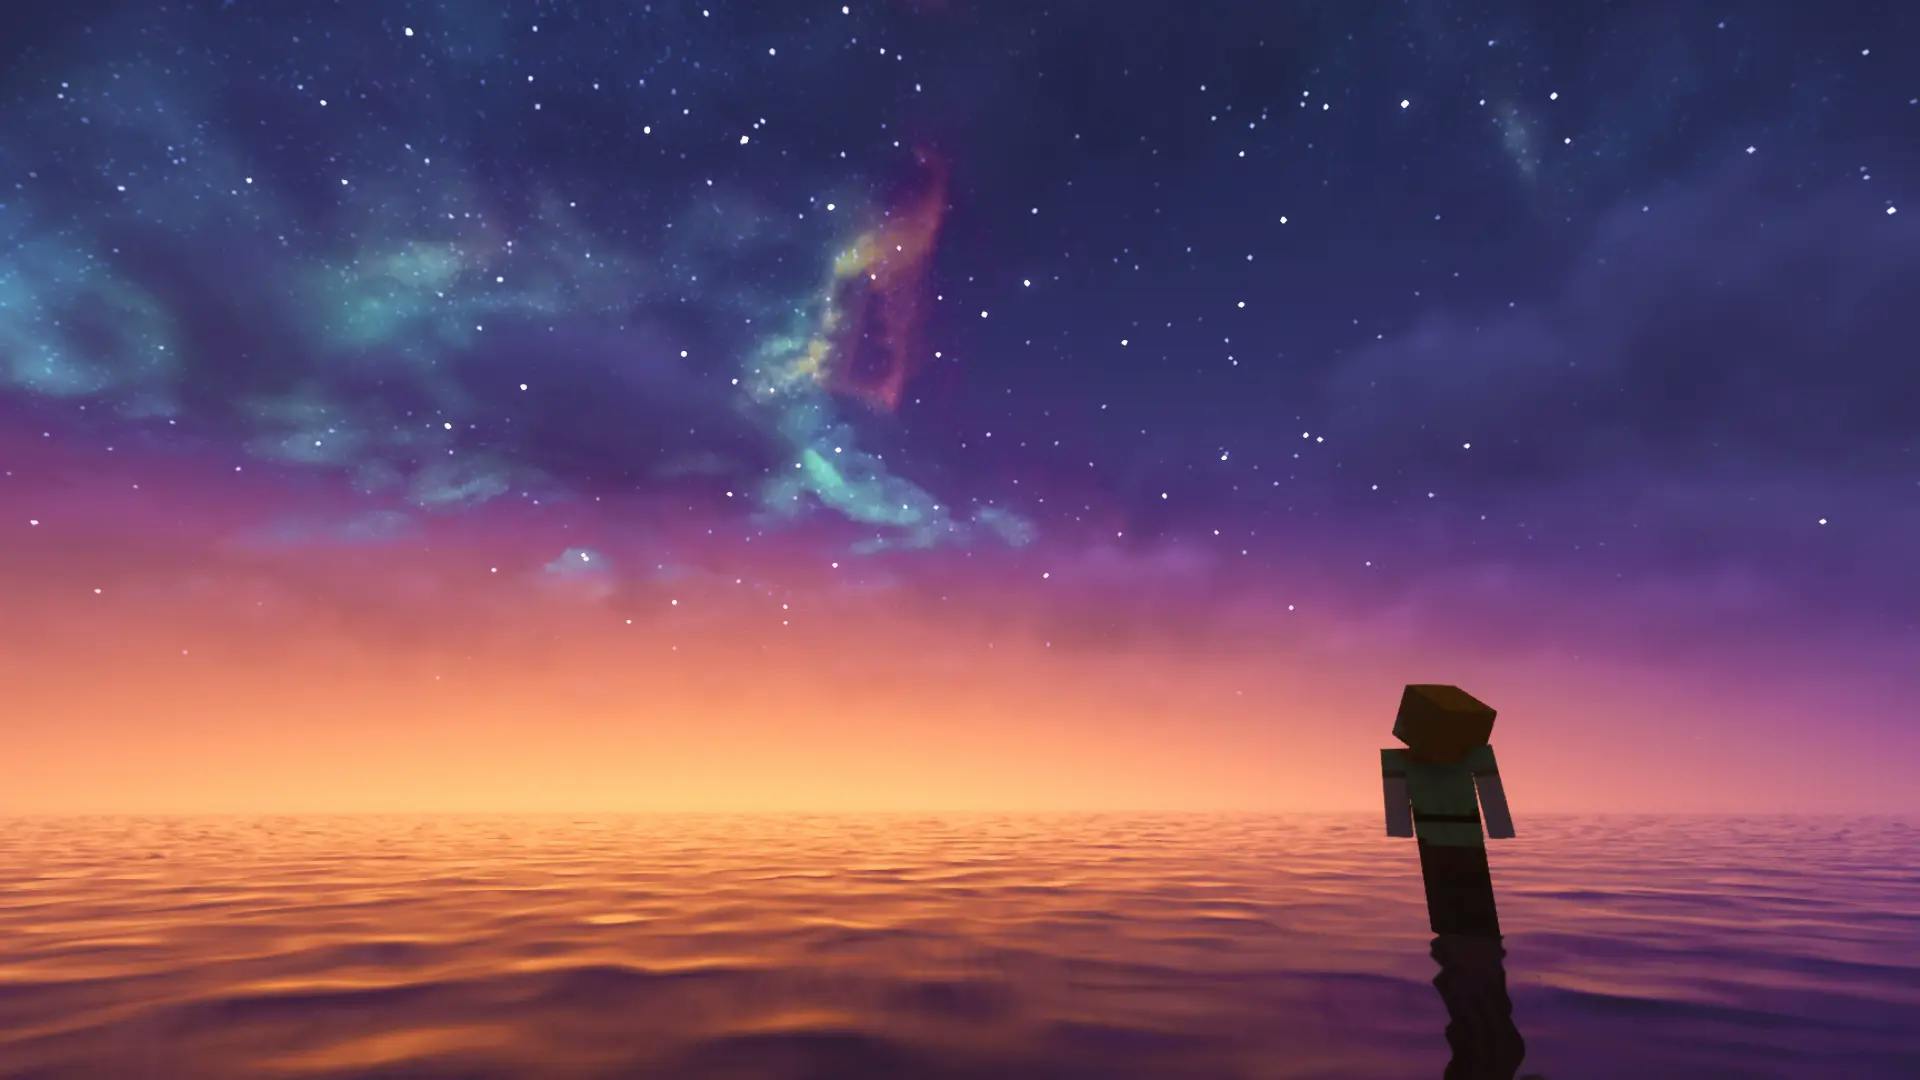 The minecraft alex character on water looking into a very detailed sky.